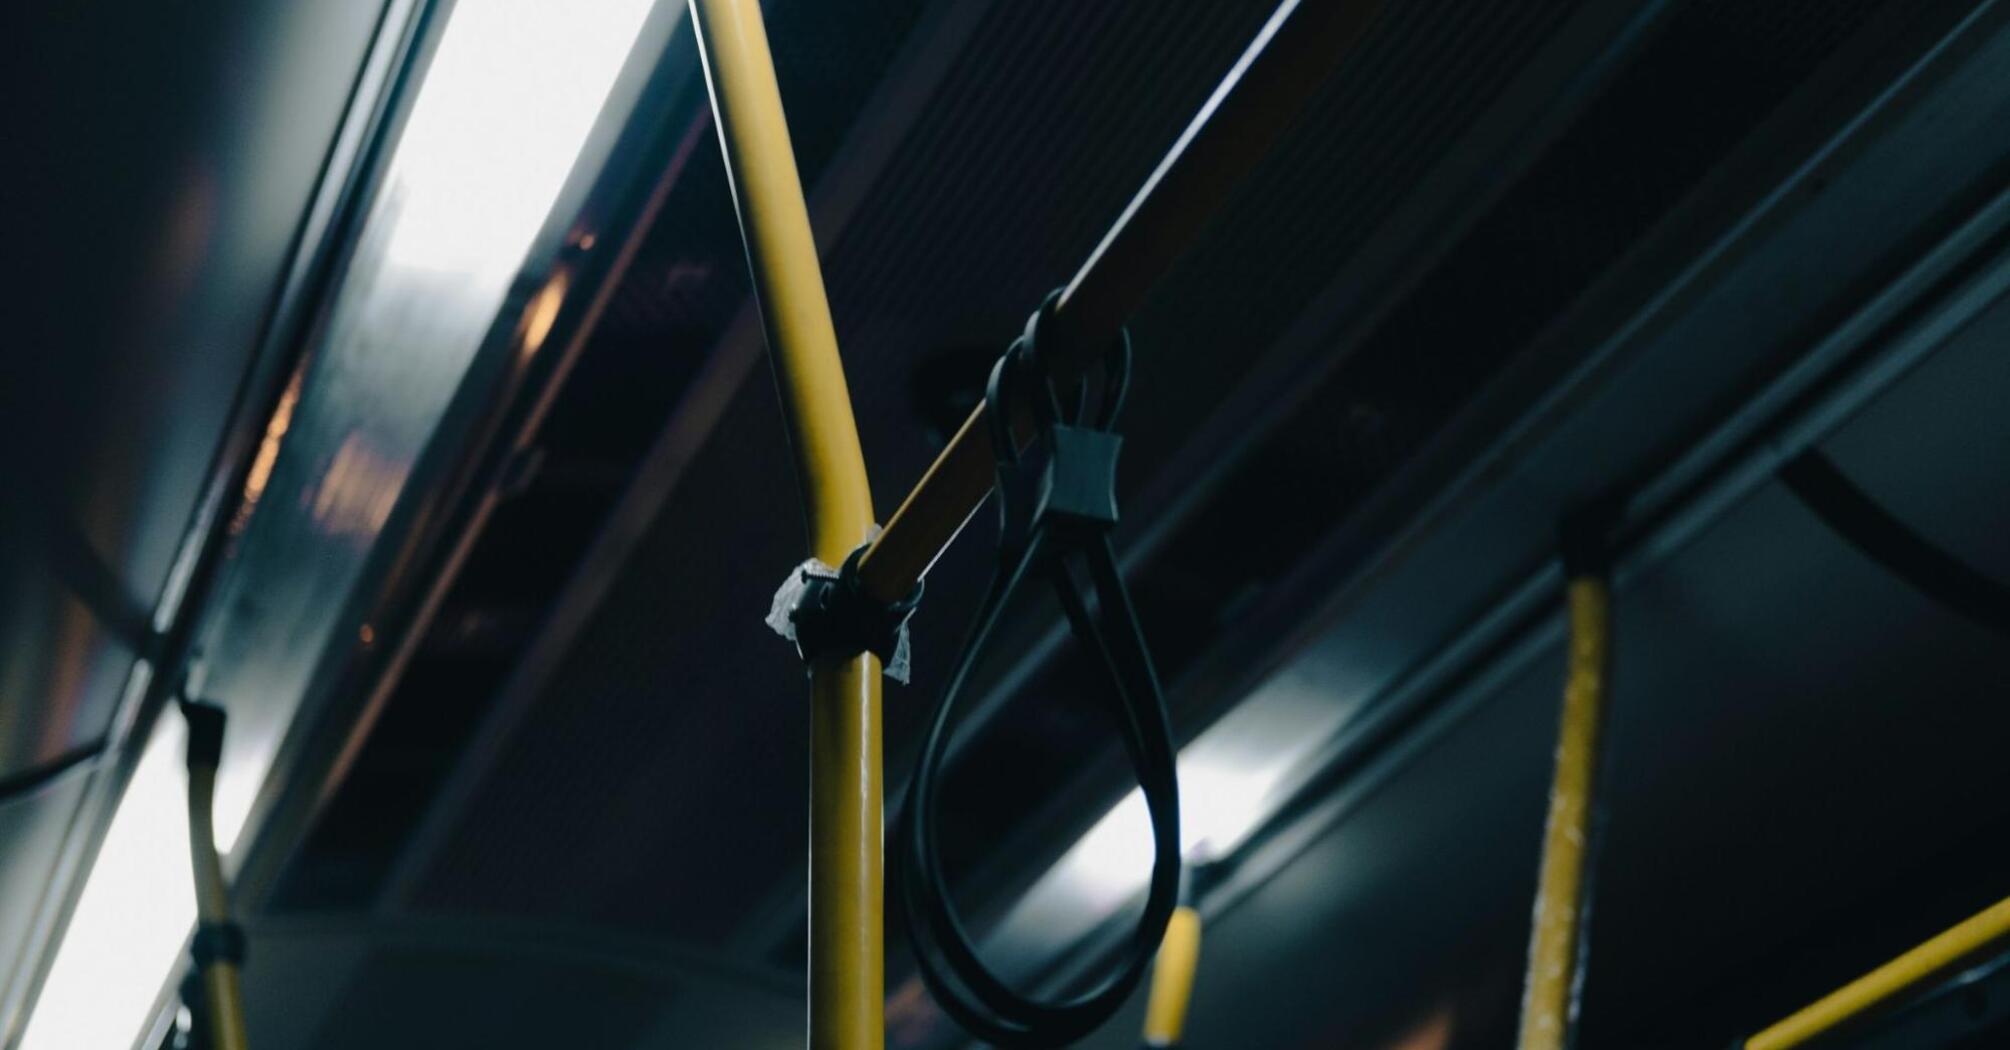 Interior of a bus with yellow poles and hanging straps